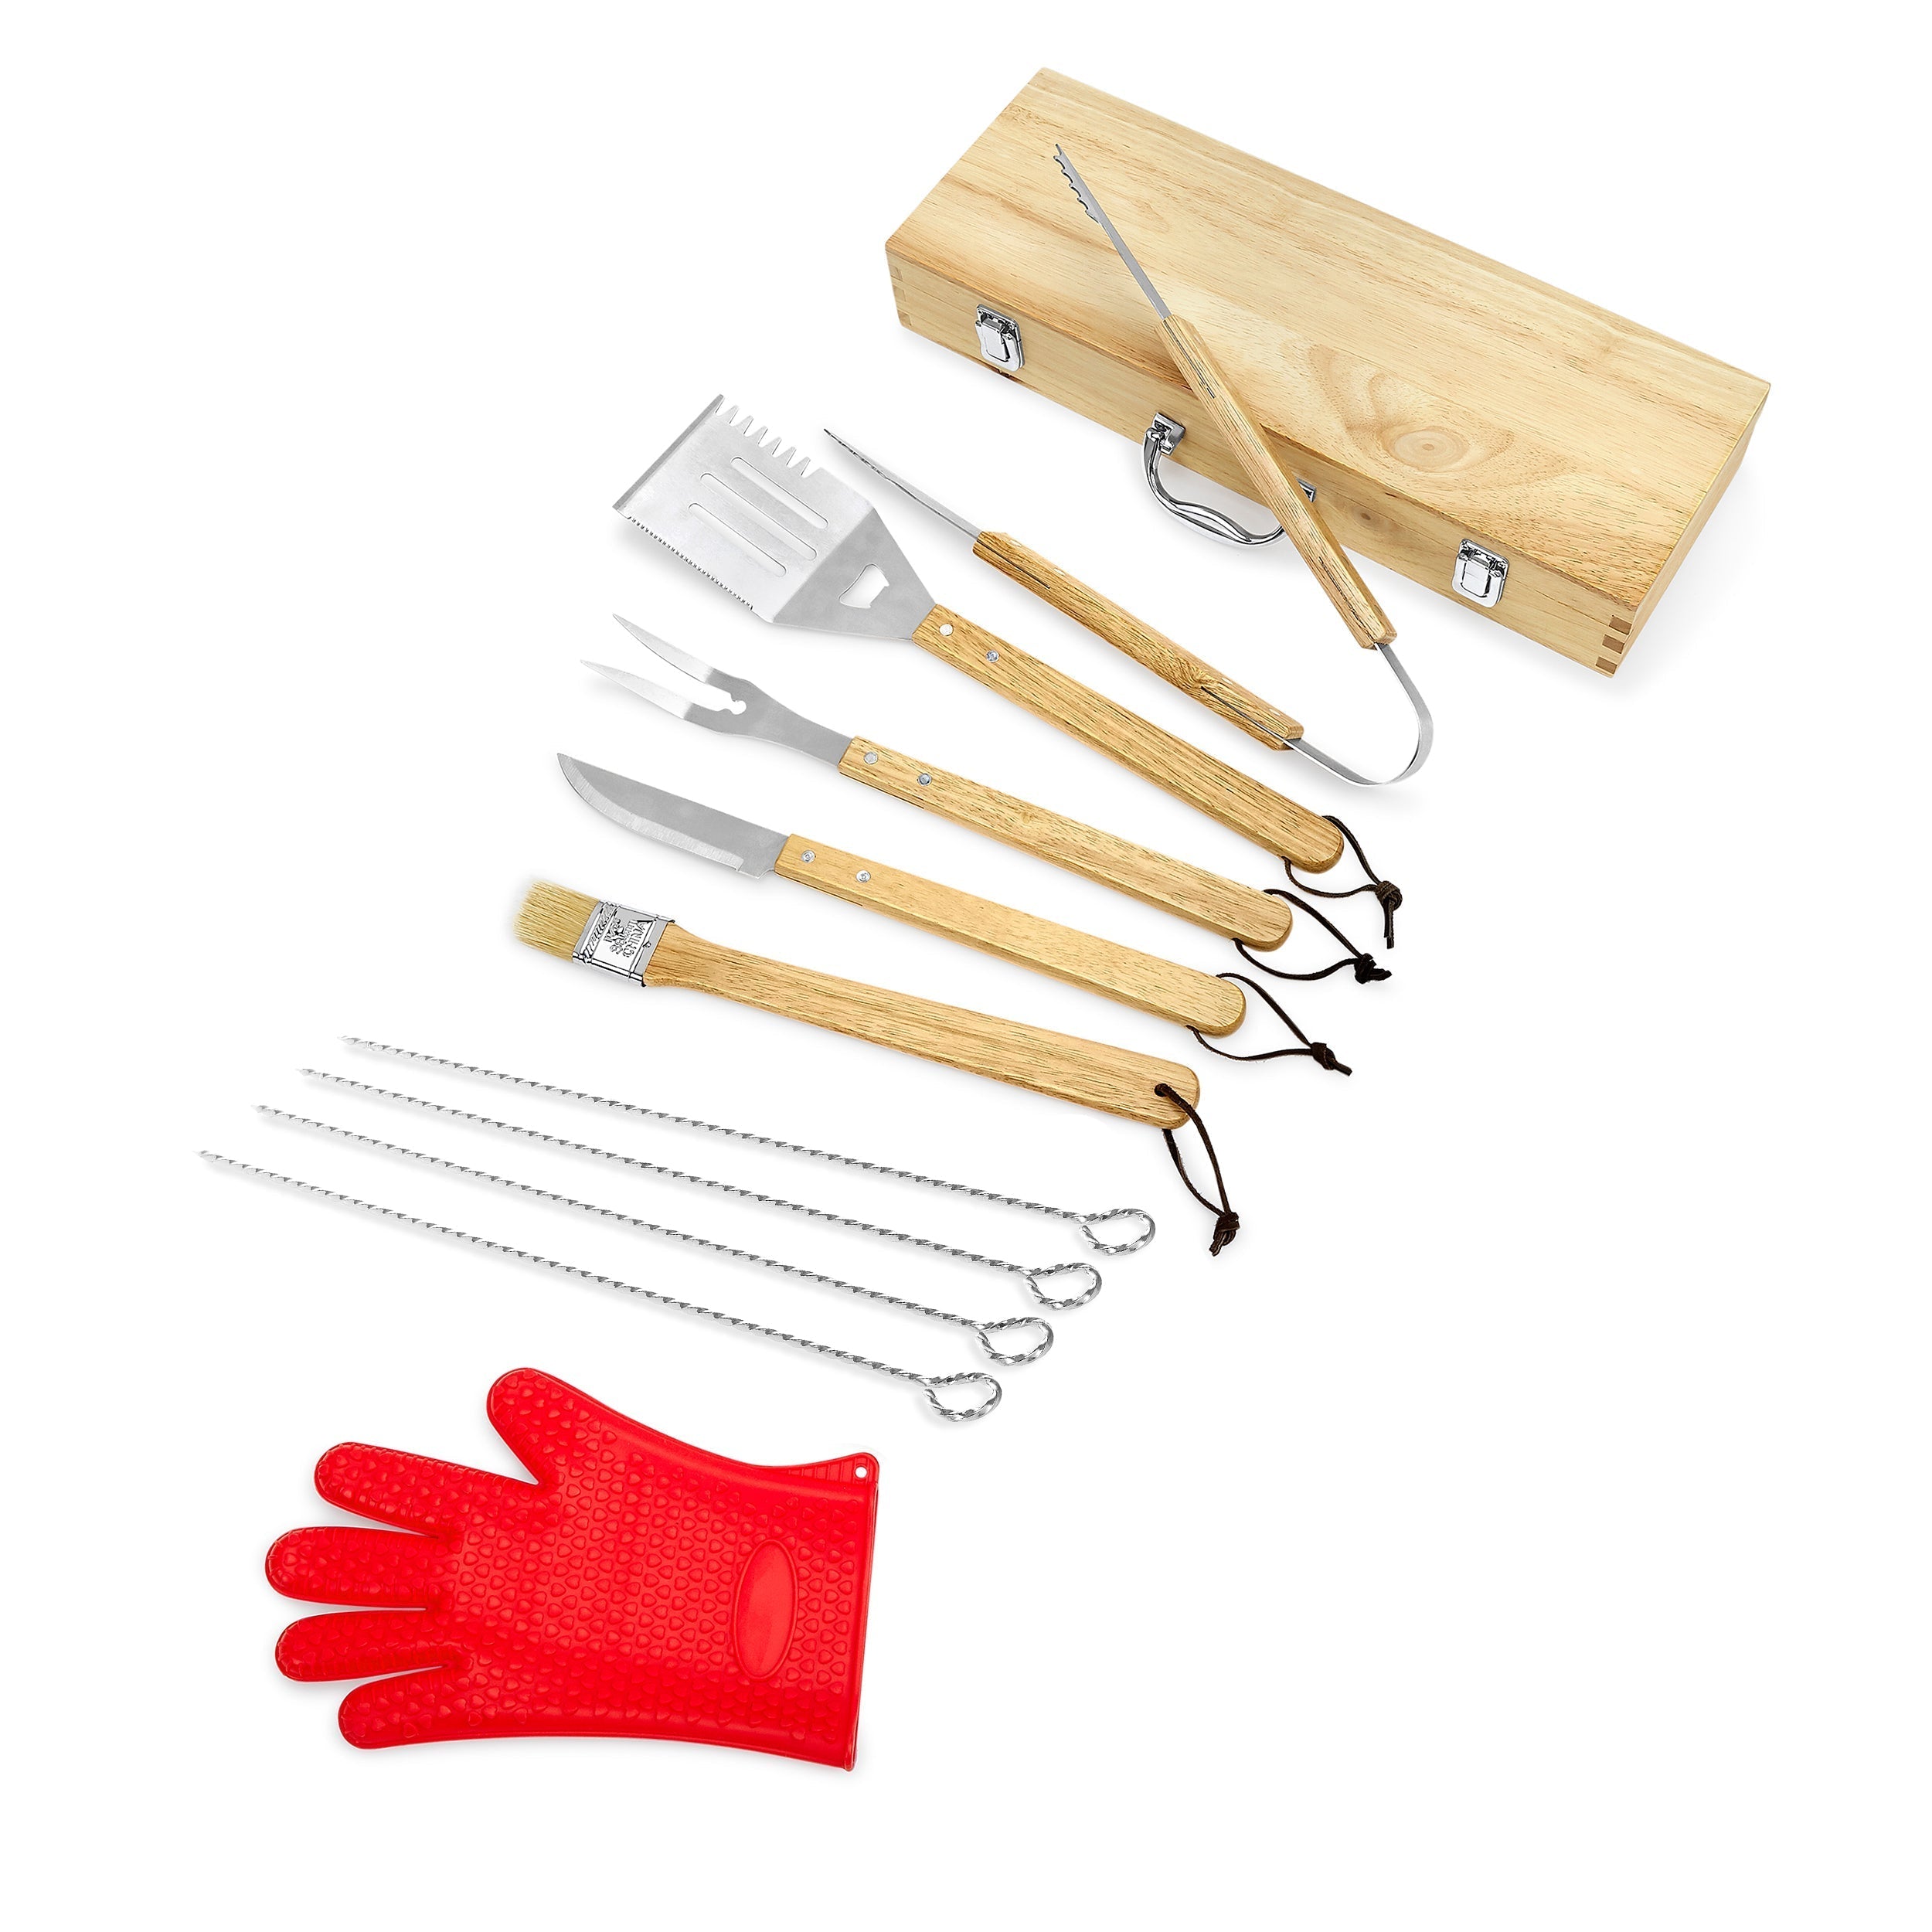 11 Piece BBQ Grill Set - Eat Drink Grill